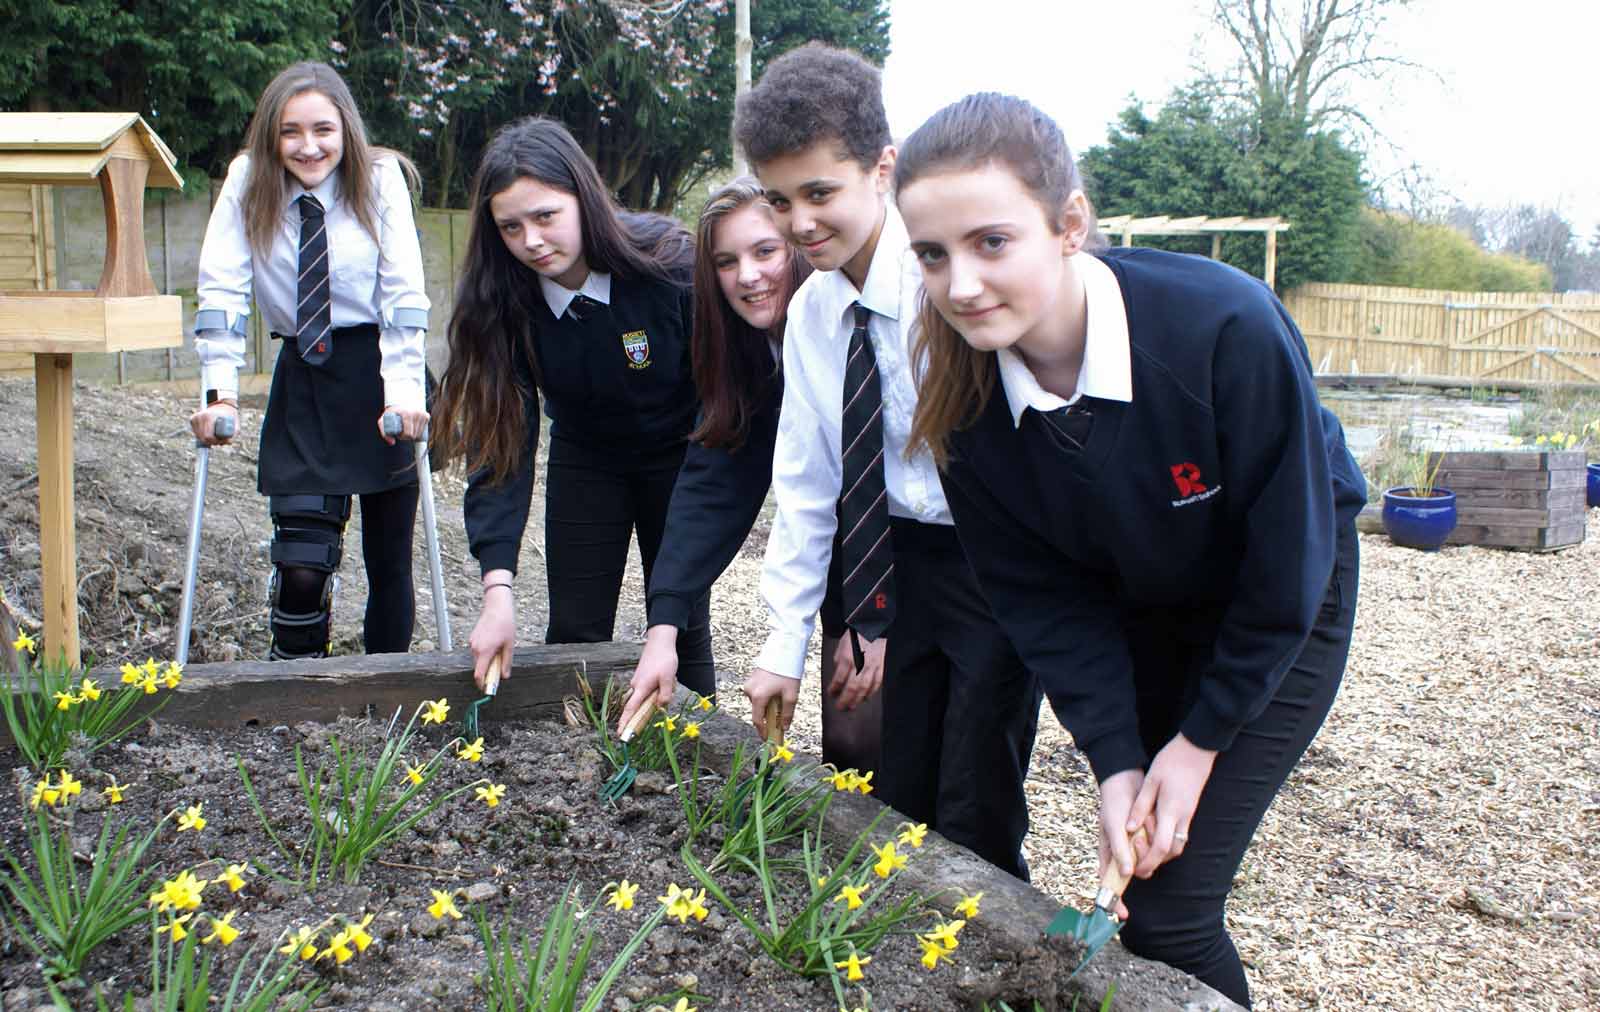 Students are working with the community to create a sensory garden at Rossett School